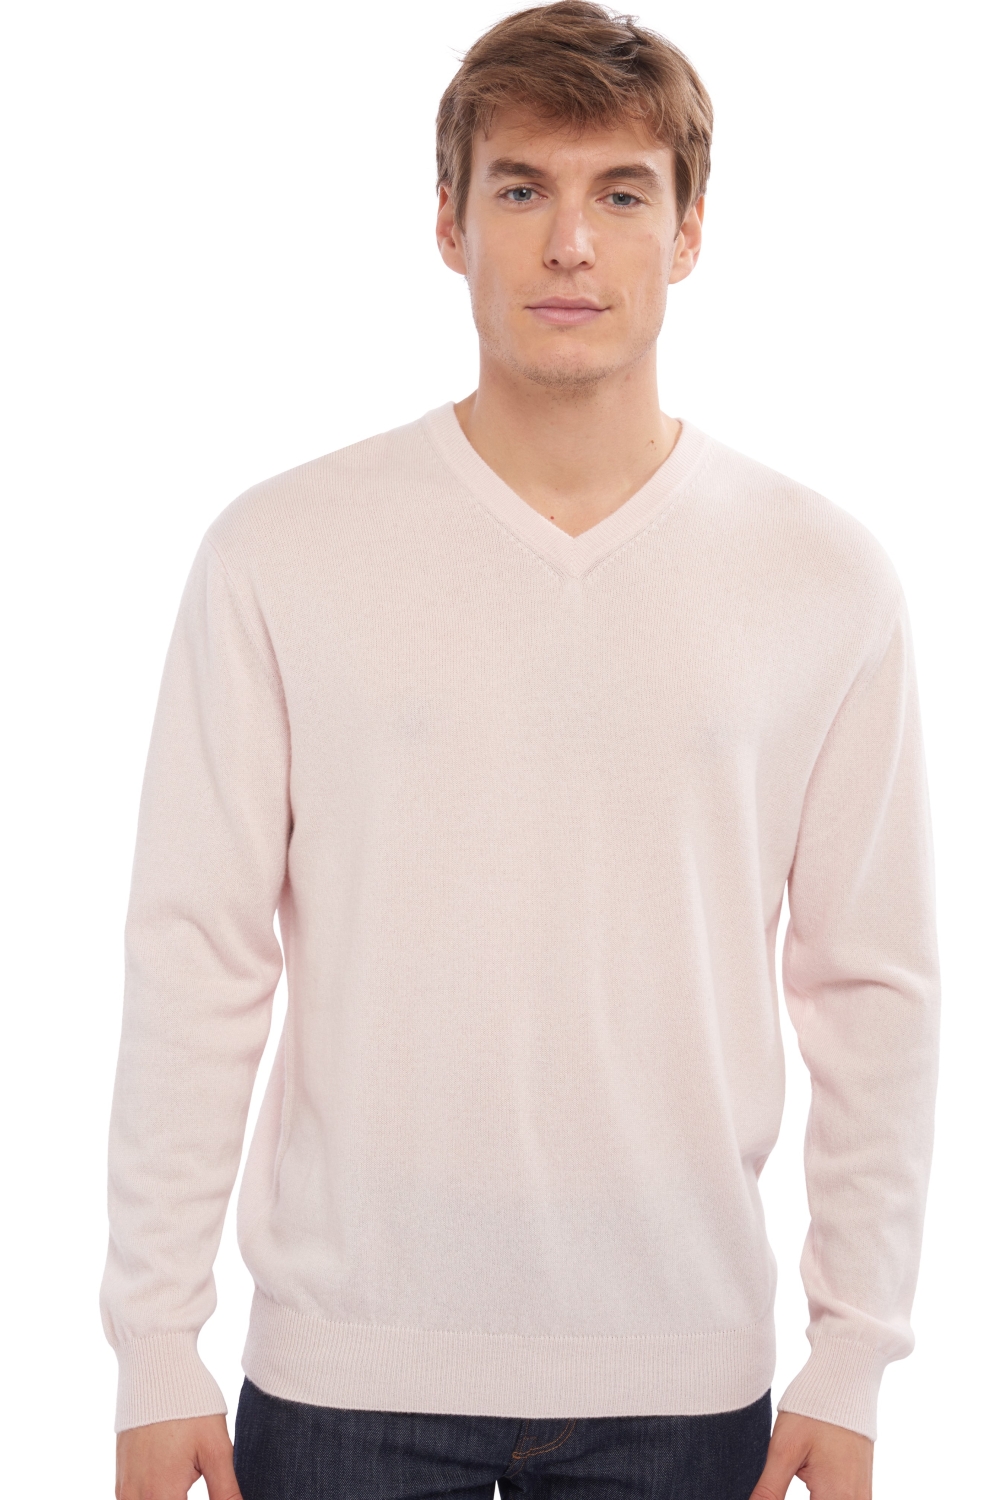 Cachemire pull homme gaspard rose pale l